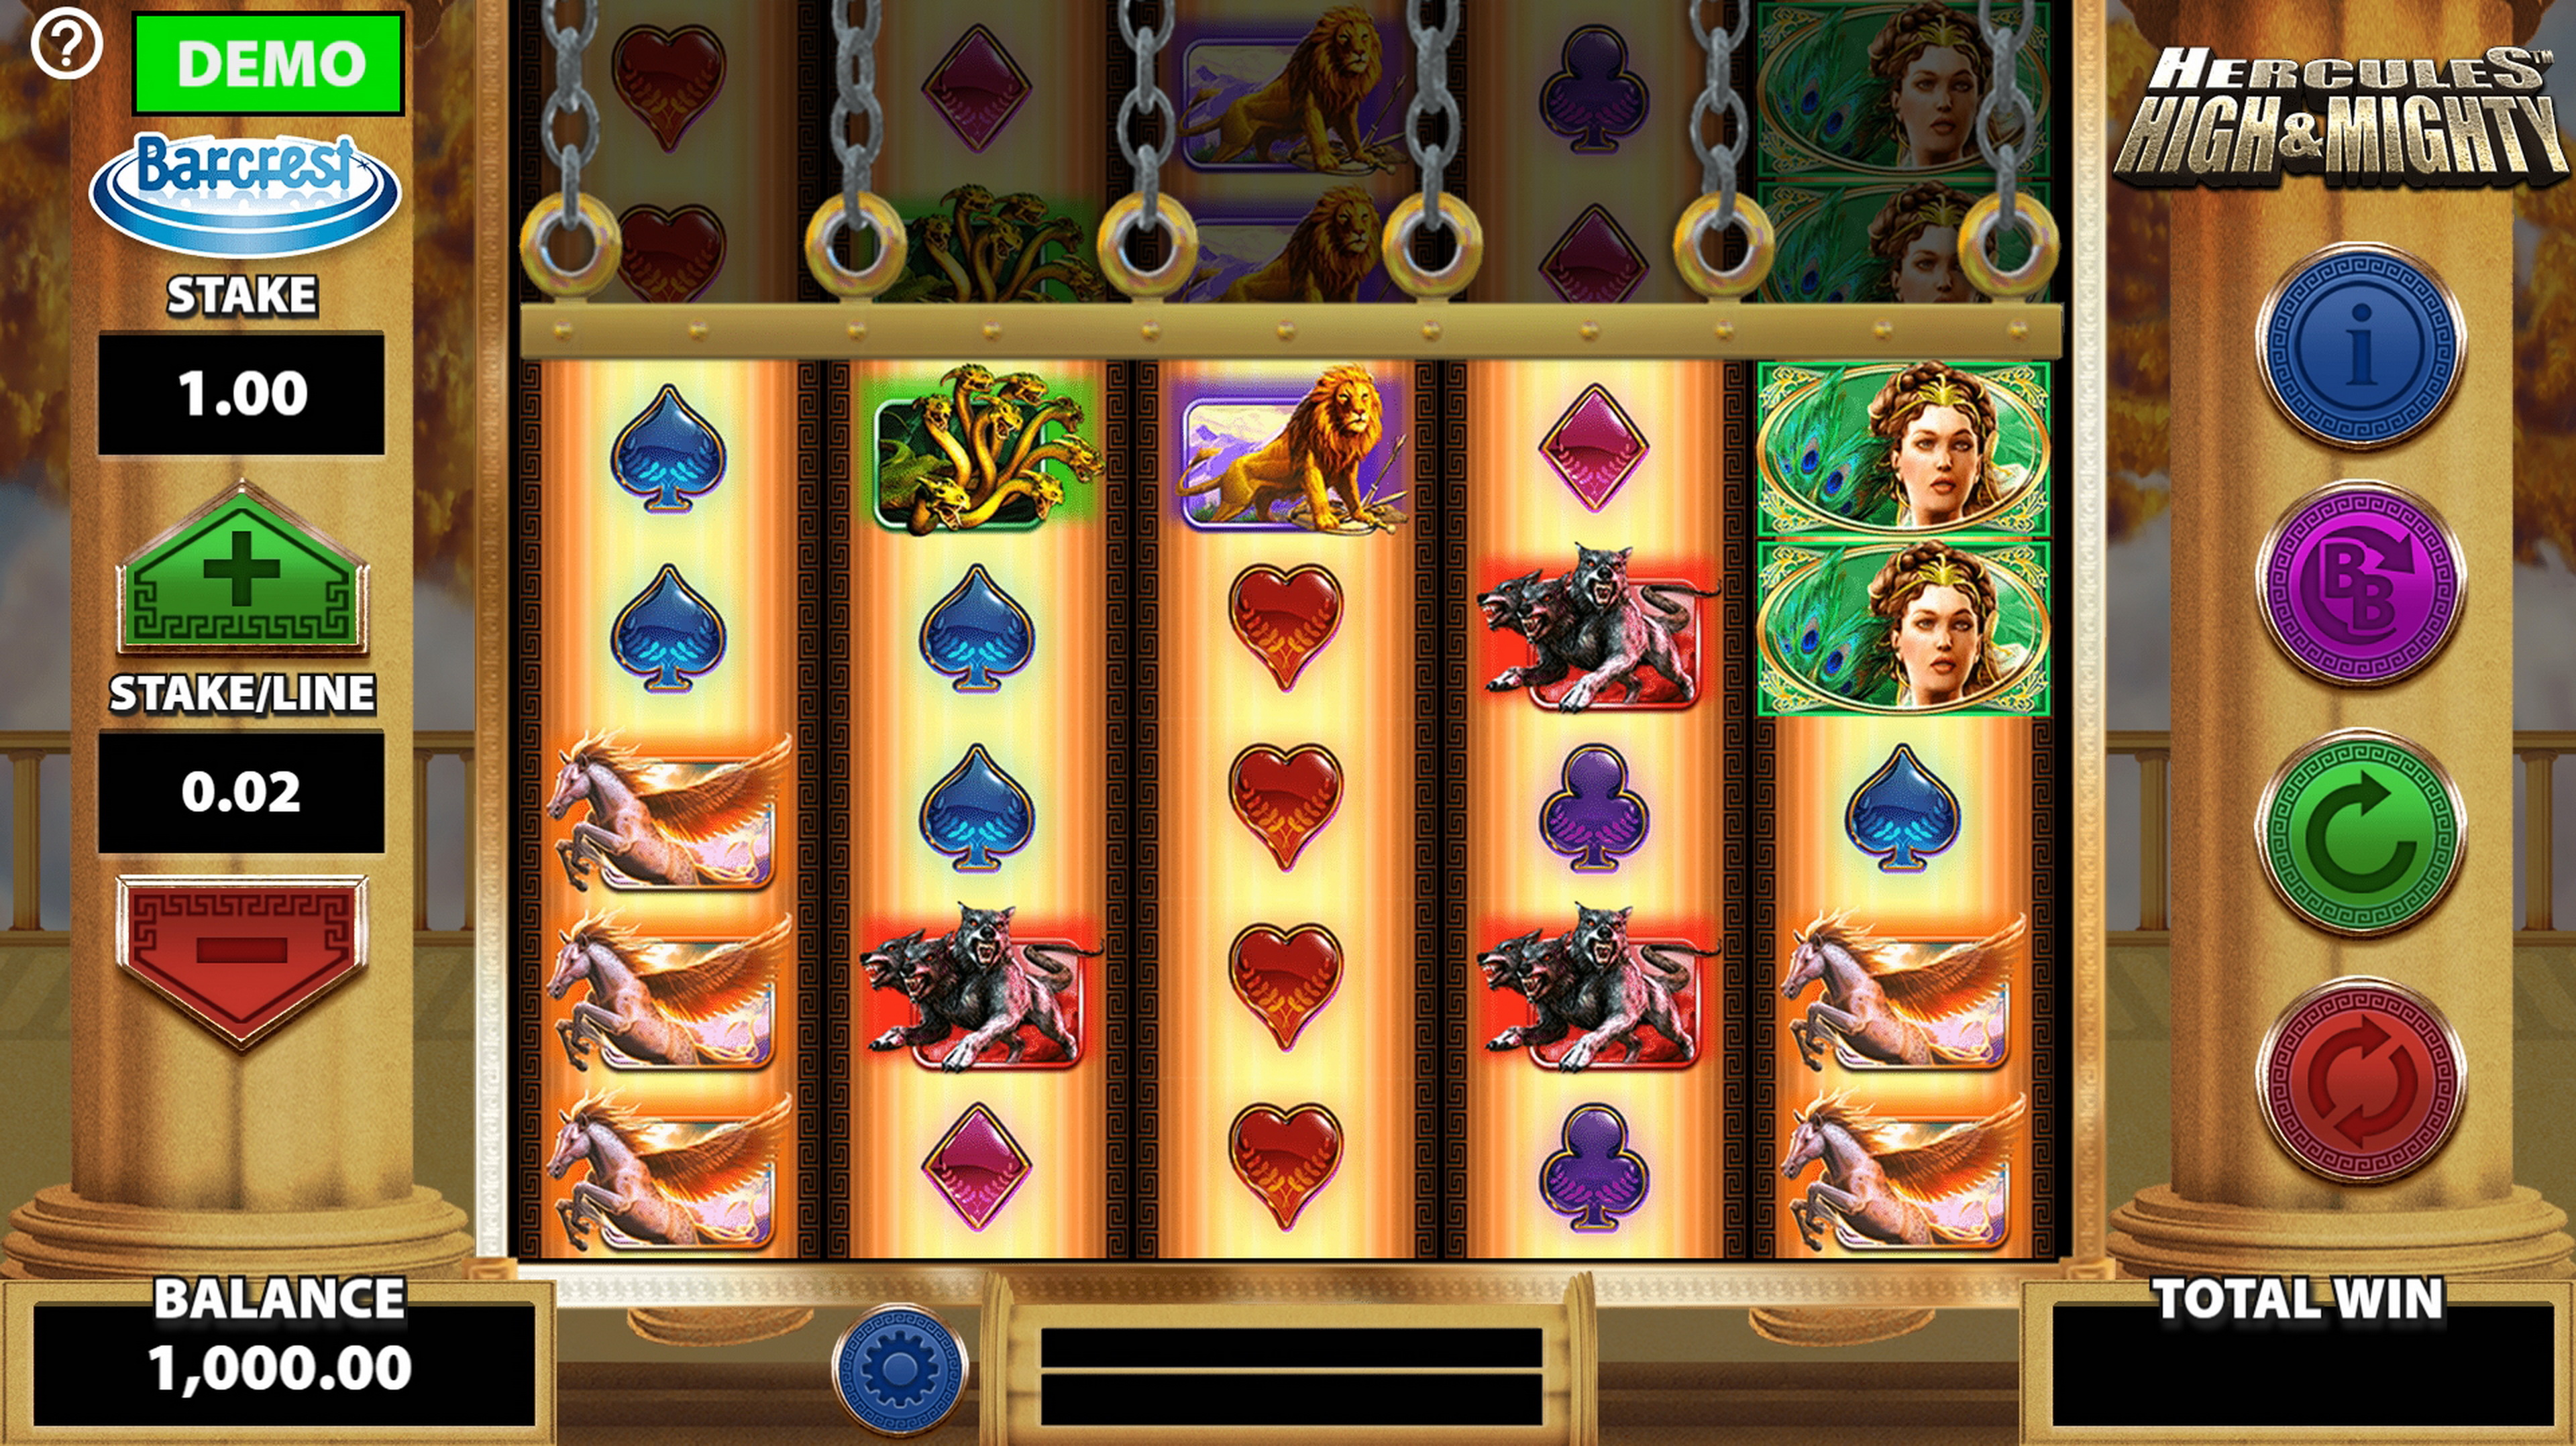 Reels in Hercules High & Mighty Slot Game by Barcrest Games